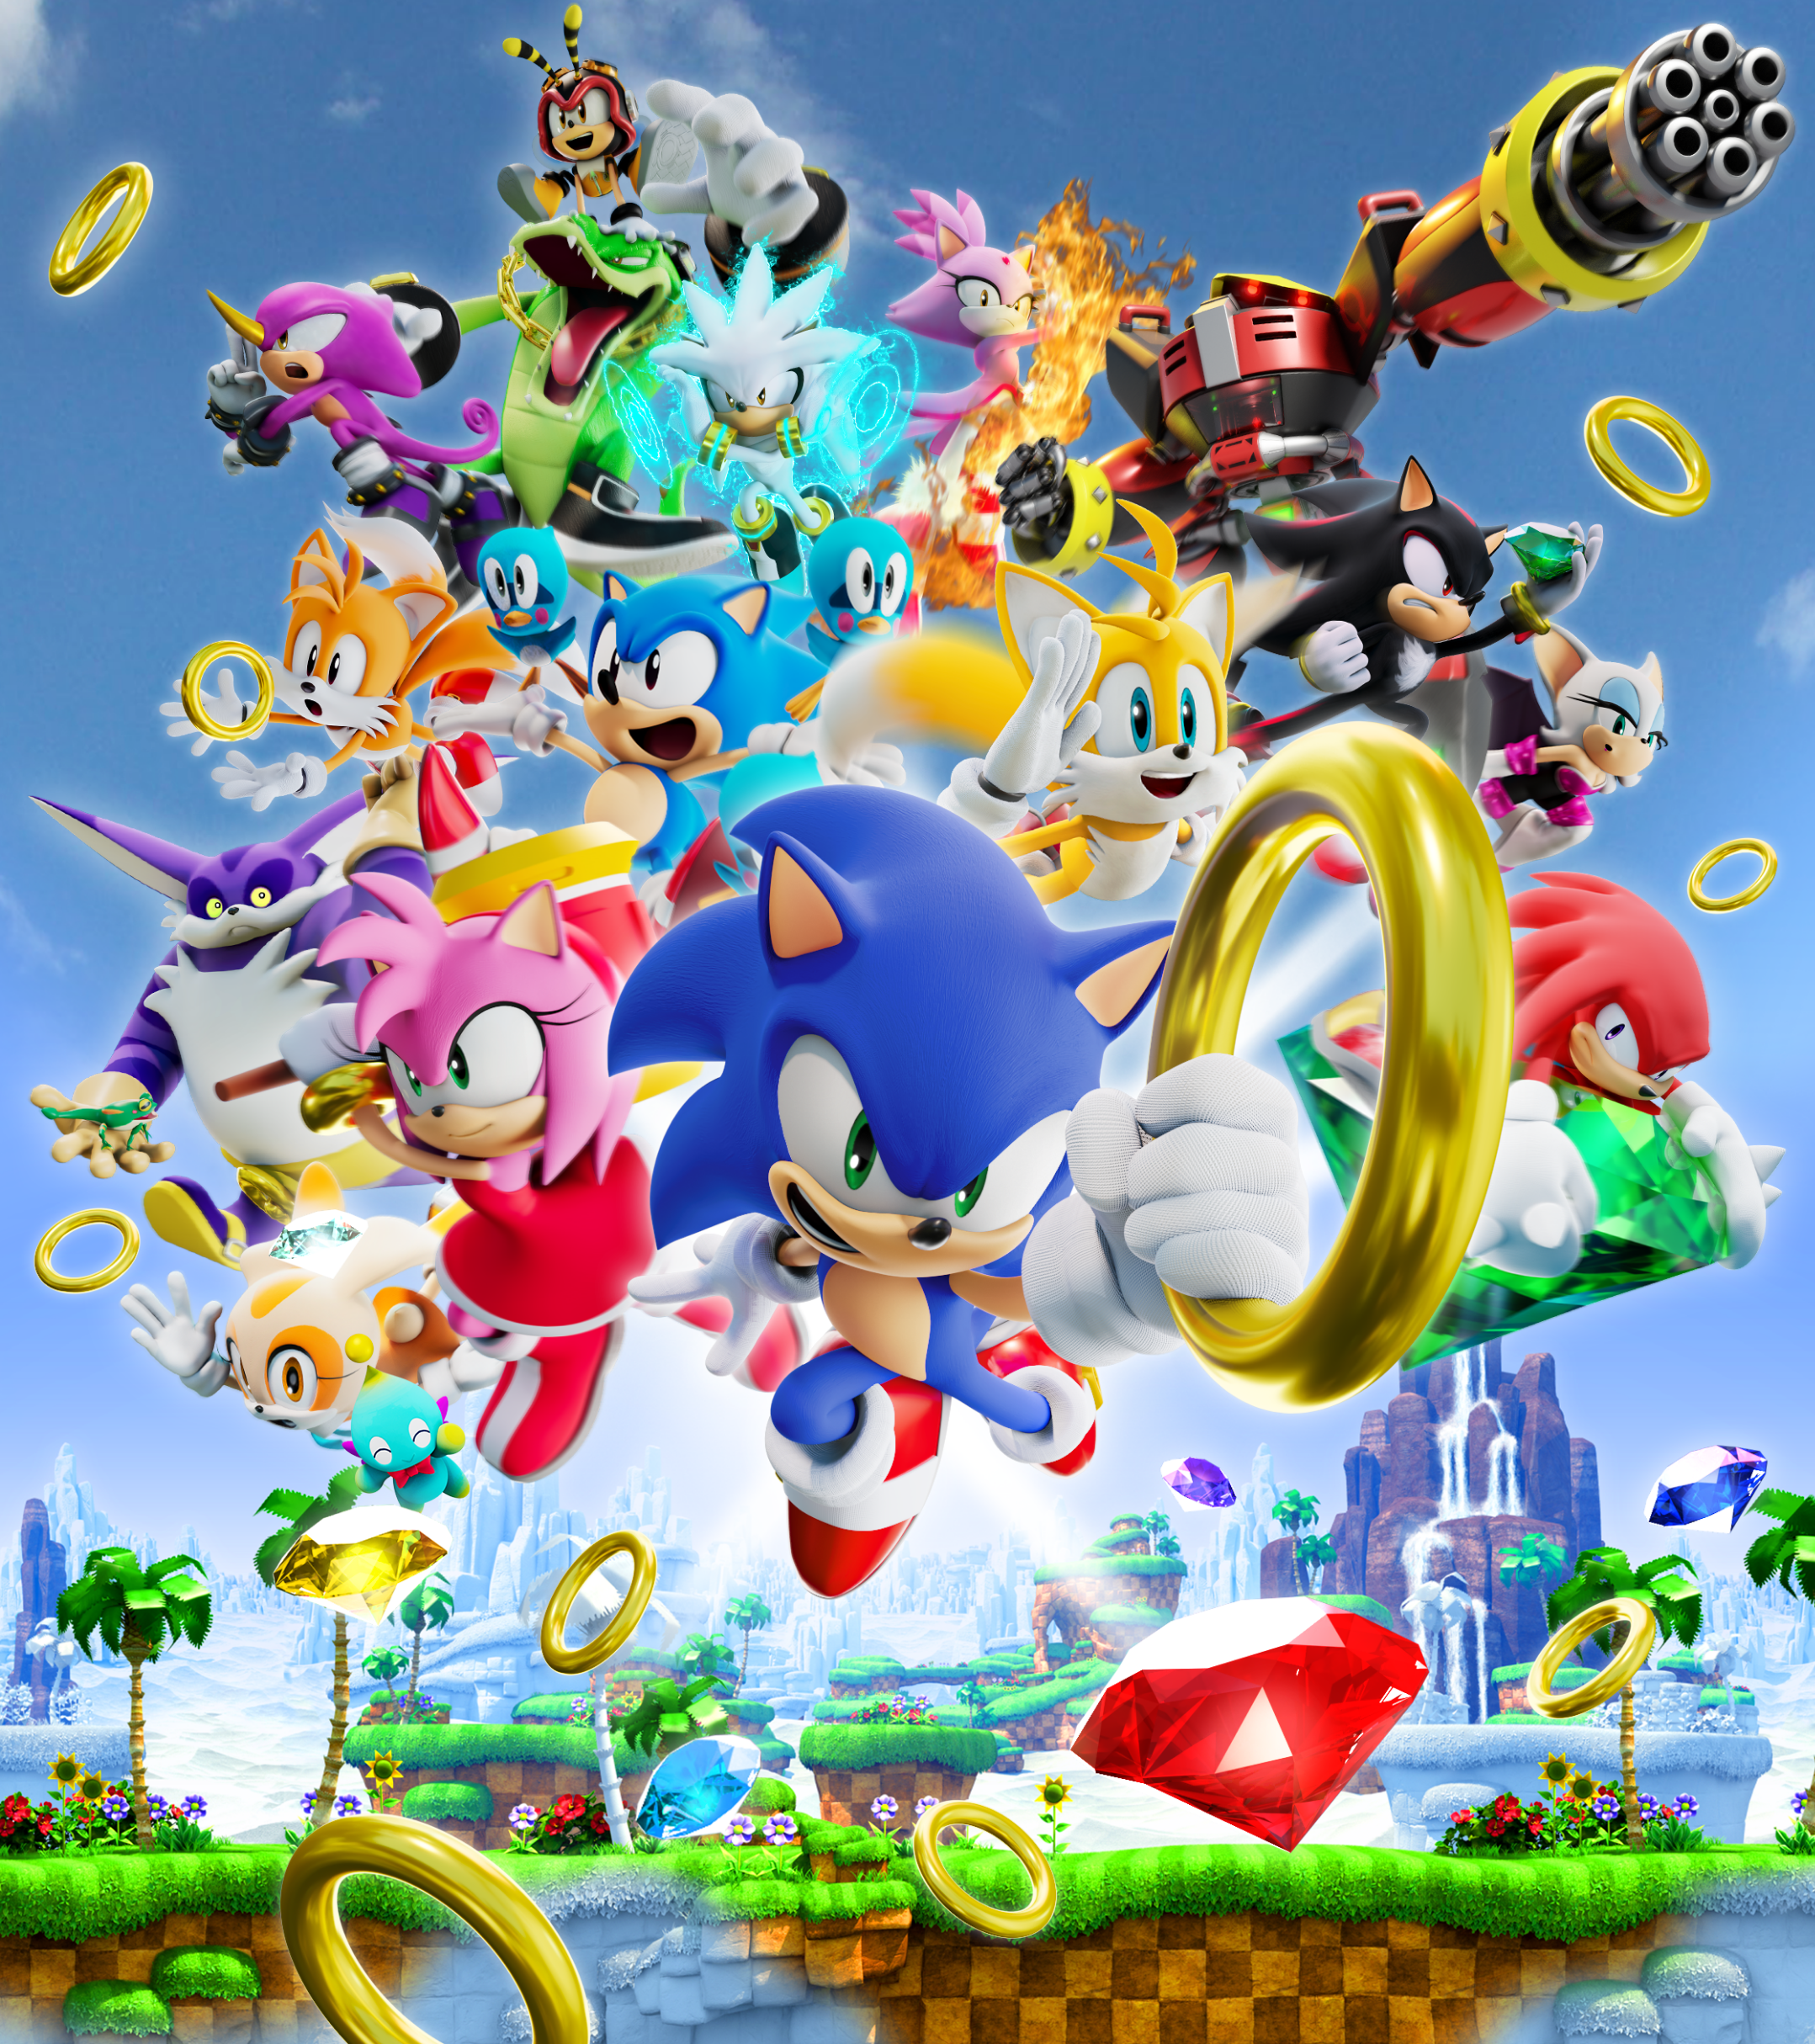 This visual is about freetoedit sonic sonicthehedgehog sonicthehedgehog2 so...